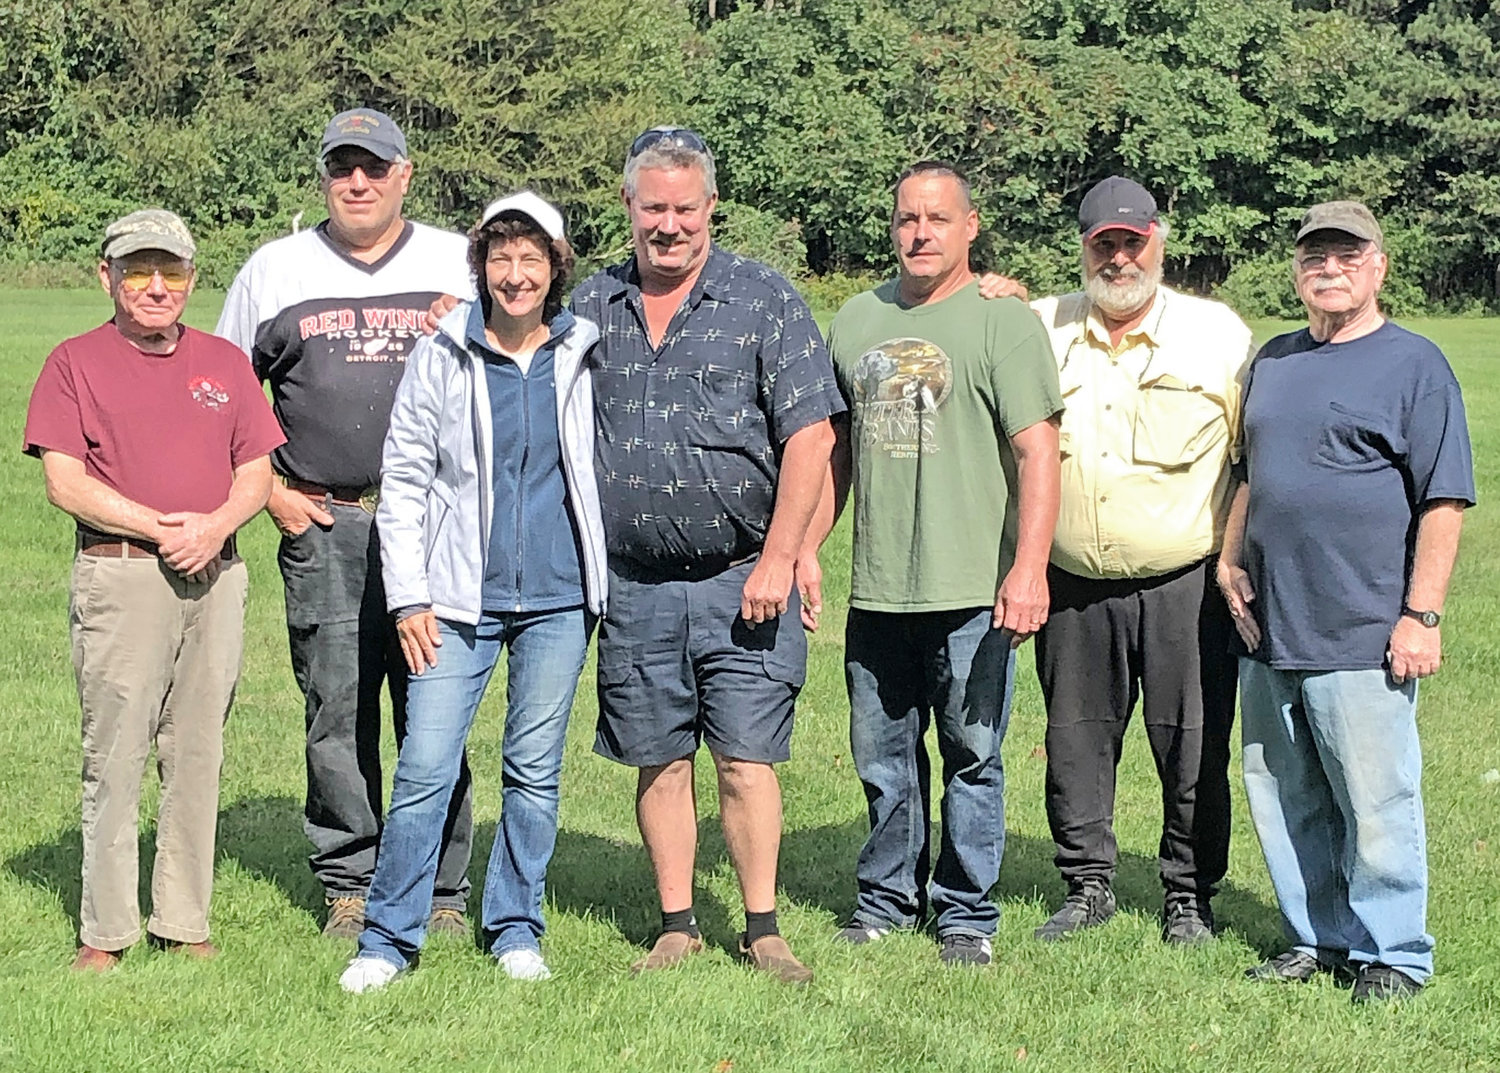 SUPPORTING CANCER PATIENTS — The New York Mills Sportsman Association and the Clinton Fish &amp; Game Club hosted a Dual Shoot in memory of members recently lost from cancer — Ralph Centolella, Al Pancillia, and Don McShane — on Saturday, Sept. 25. The trap event raised $1,500, with all proceeds being presented to the Joseph Michael Chubbuck Foundation to assist cancer patients in financial need in Central New York.  The Chubbuck Foundation was launched in January 2015 and has assisted more than 700 patients with approximately $280,000. To learn more, or to donate, go to www.thejmcf.org. From left: Tom Brown; Kurt President, president of NYM Sportsman Association; Barb Chubbuck, JMCF vice-president; David Peckham; Steve Malerba; Tony Santucci, president of Clinton Fish &amp; Game Club; and Jim Gormandy, CF&amp;G treasurer.